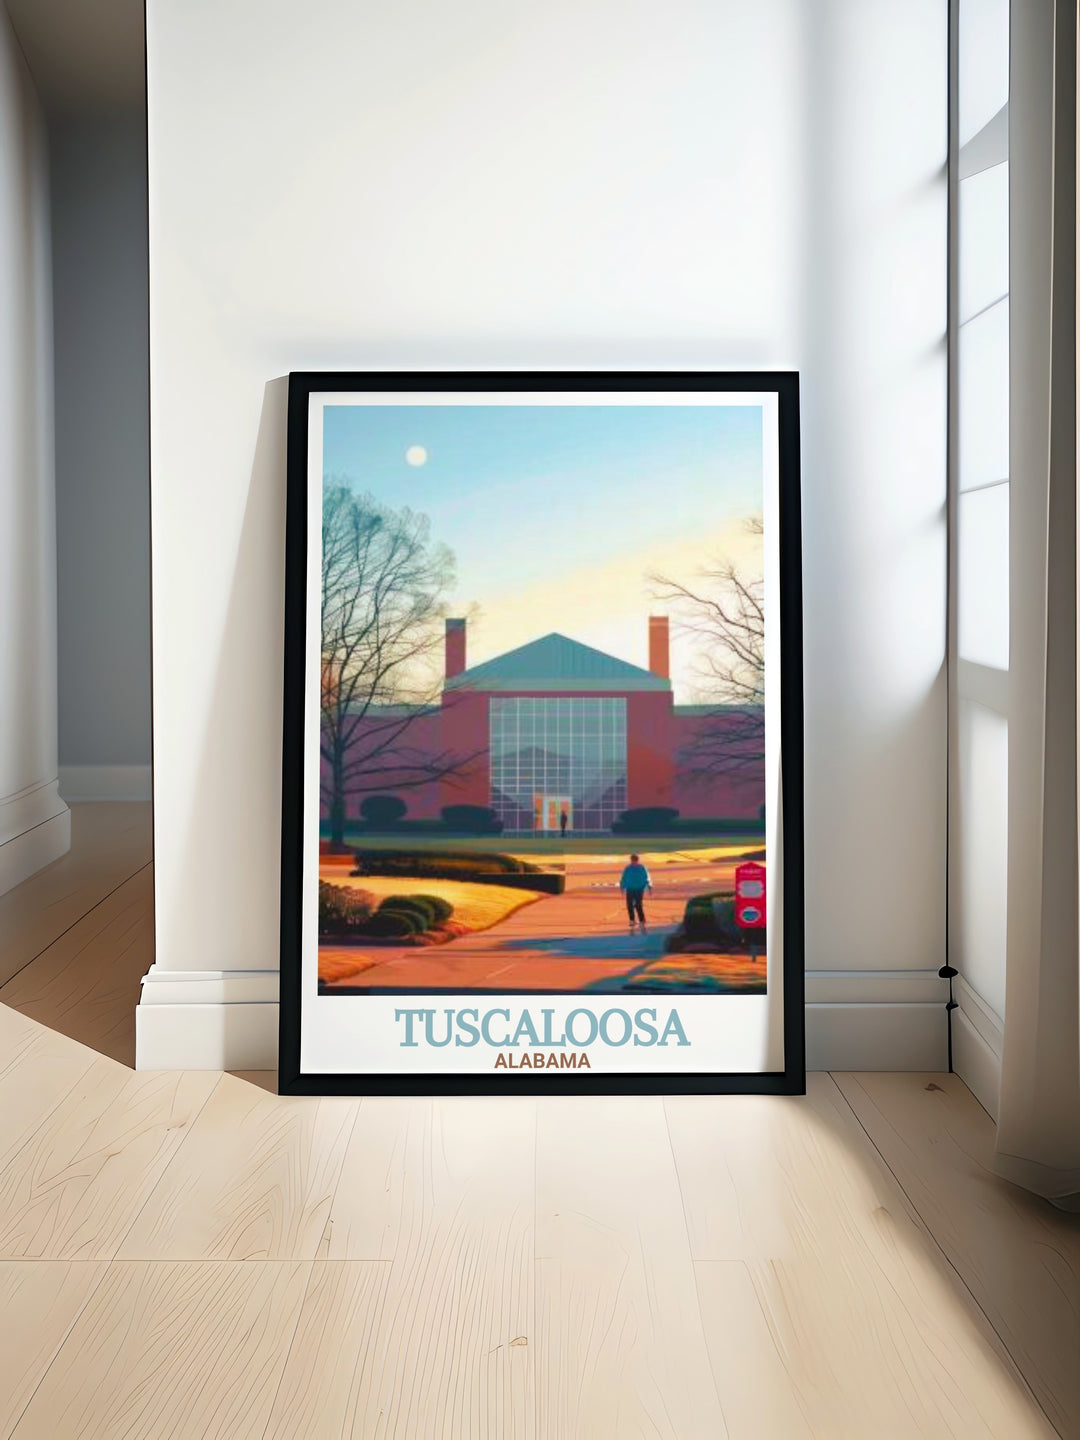 Alabama poster featuring the vibrant Tuscaloosa skyline and Paul W. Bryant Museum perfect for Tuscaloosa decor and gifts bringing the citys charm and energy into any home or office with stunning Tuscaloosa wall art and modern prints